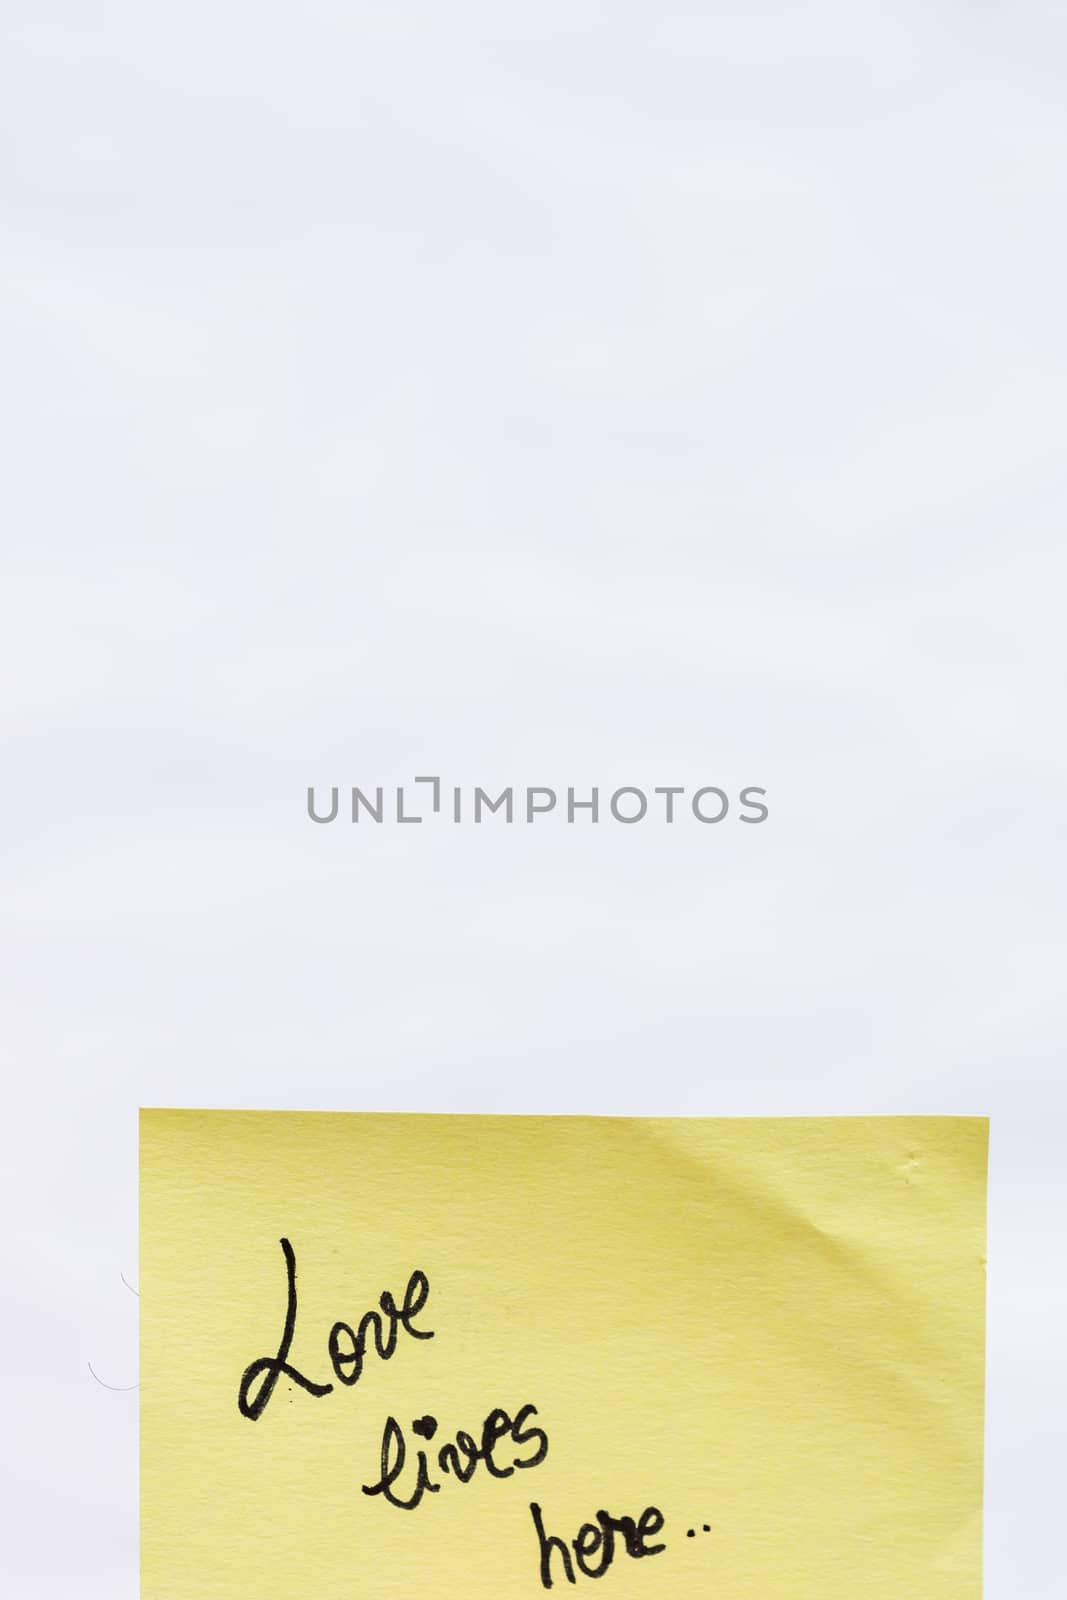 Love lives here handwriting text close up isolated on yellow pap by vladispas